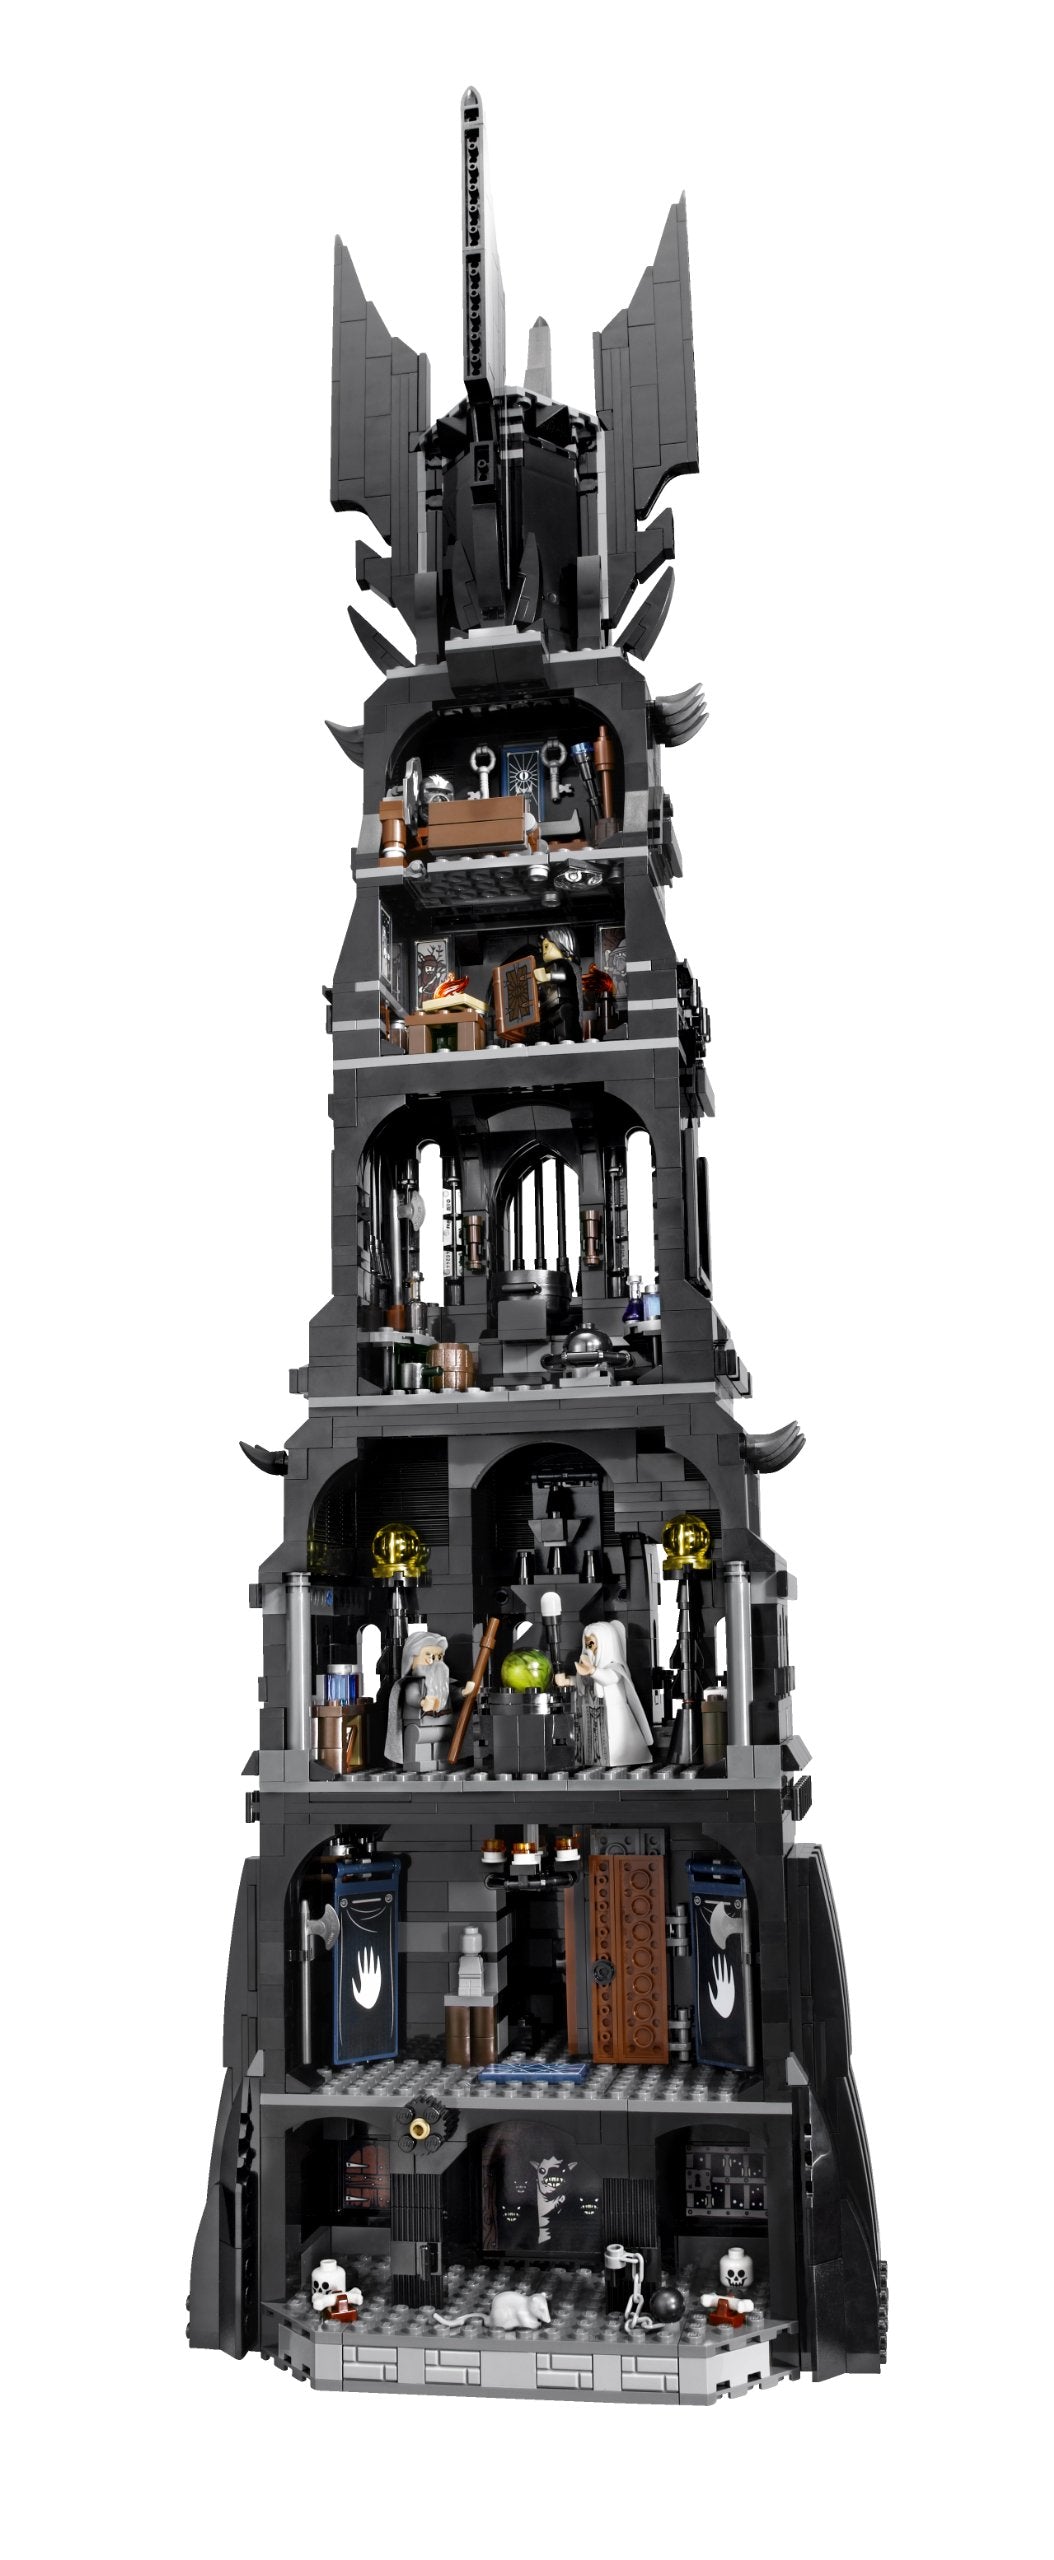 LEGO Lord of the Rings 10237 Tower of Orthanc Building Set